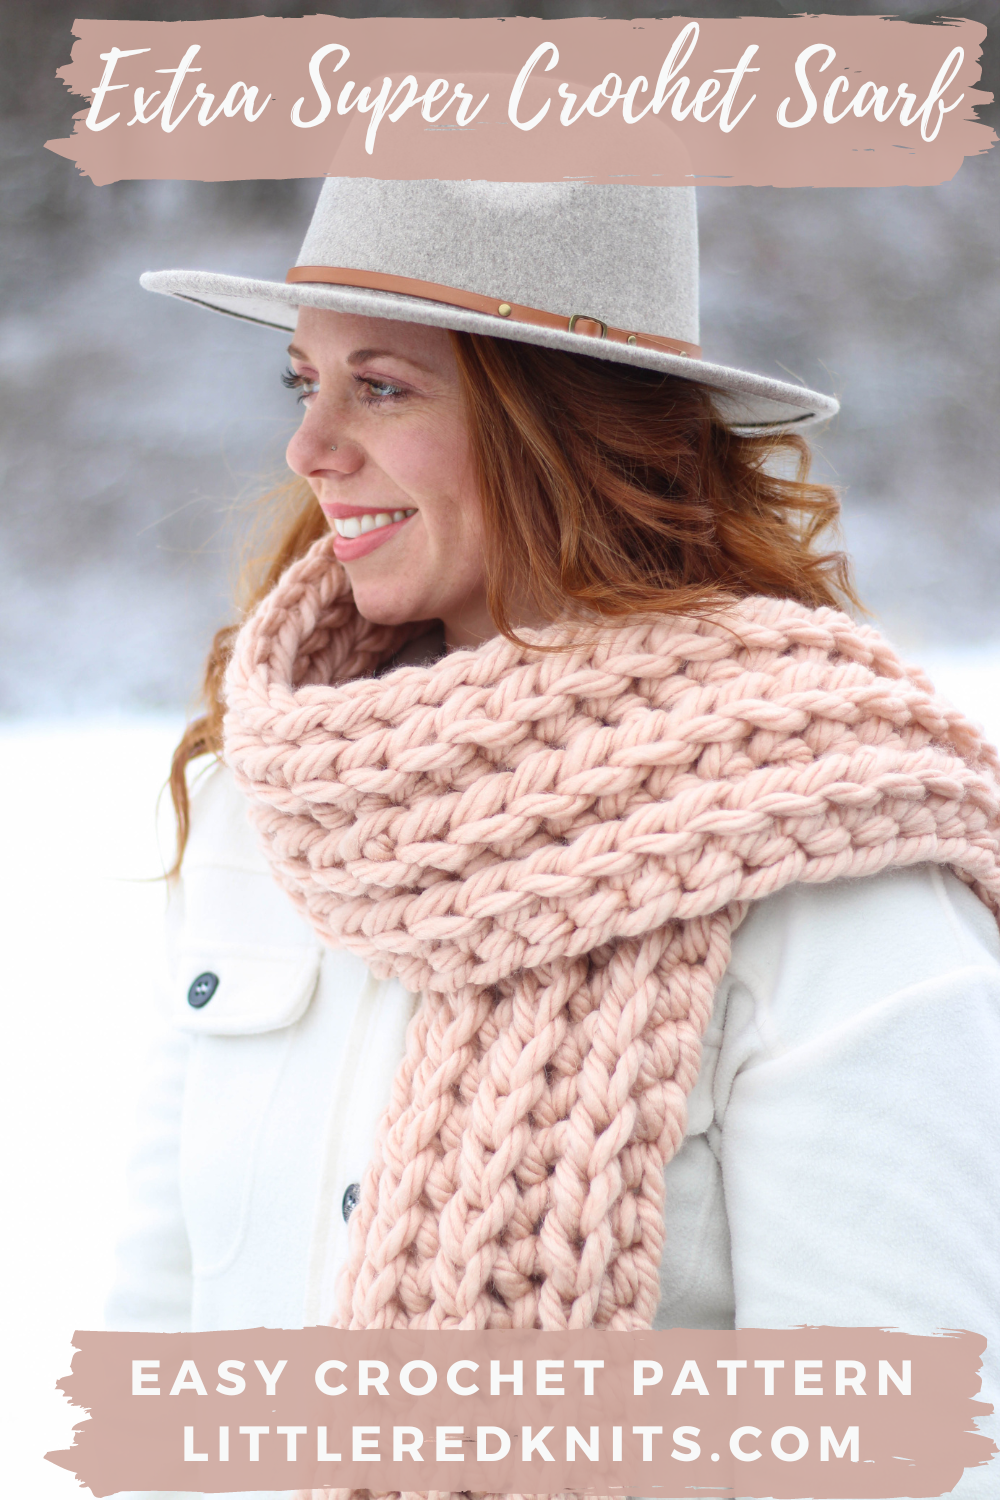 [EXTRA SUPER CROCHET SCARF] FREE Pattern! | Little Red Knits